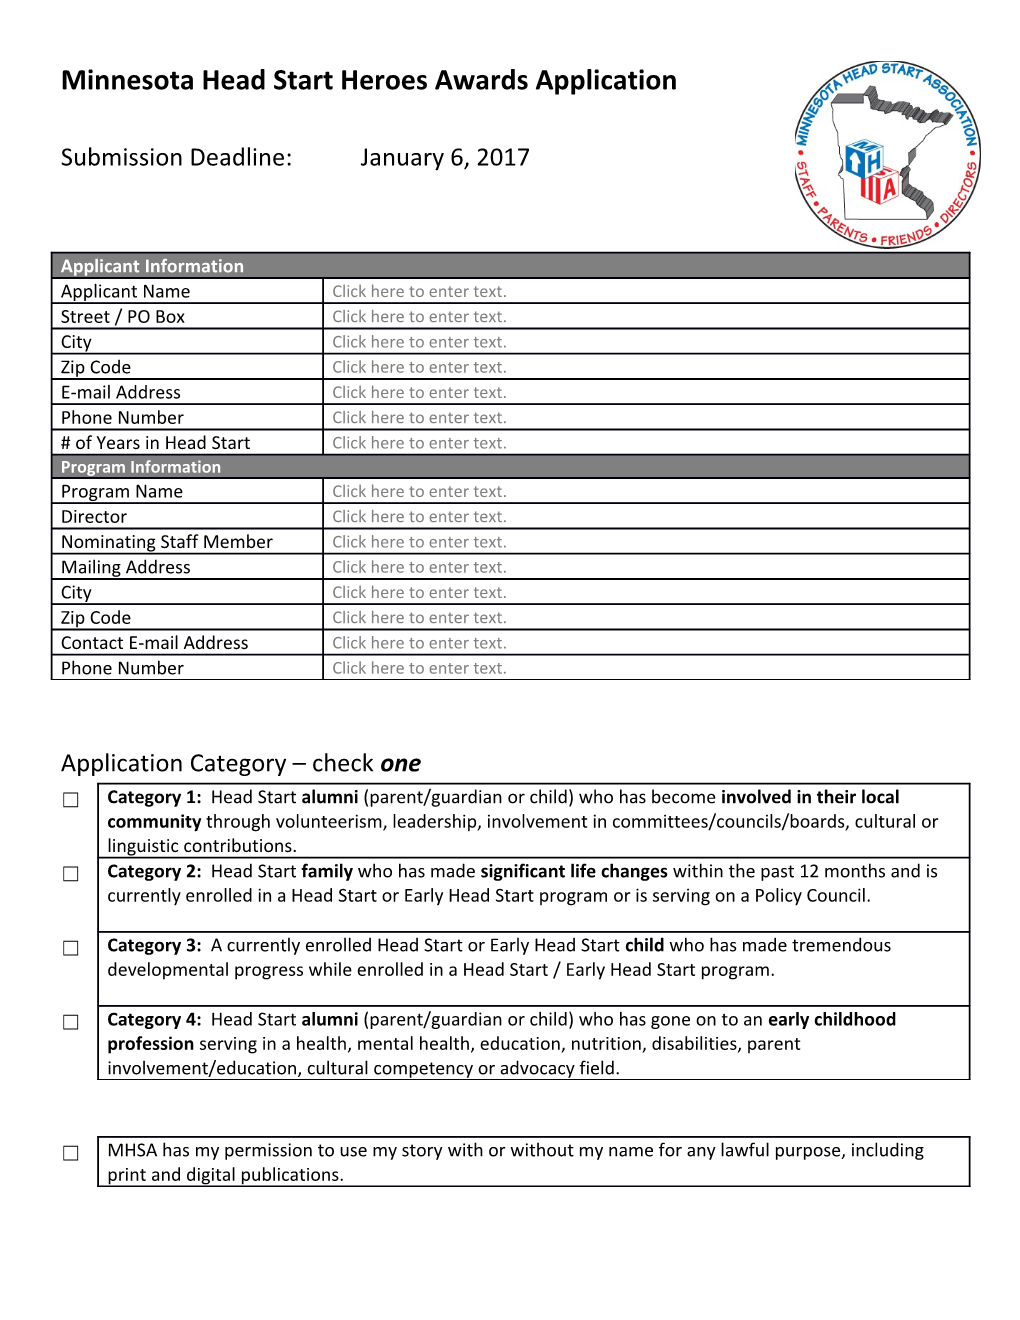 Application Category Check One